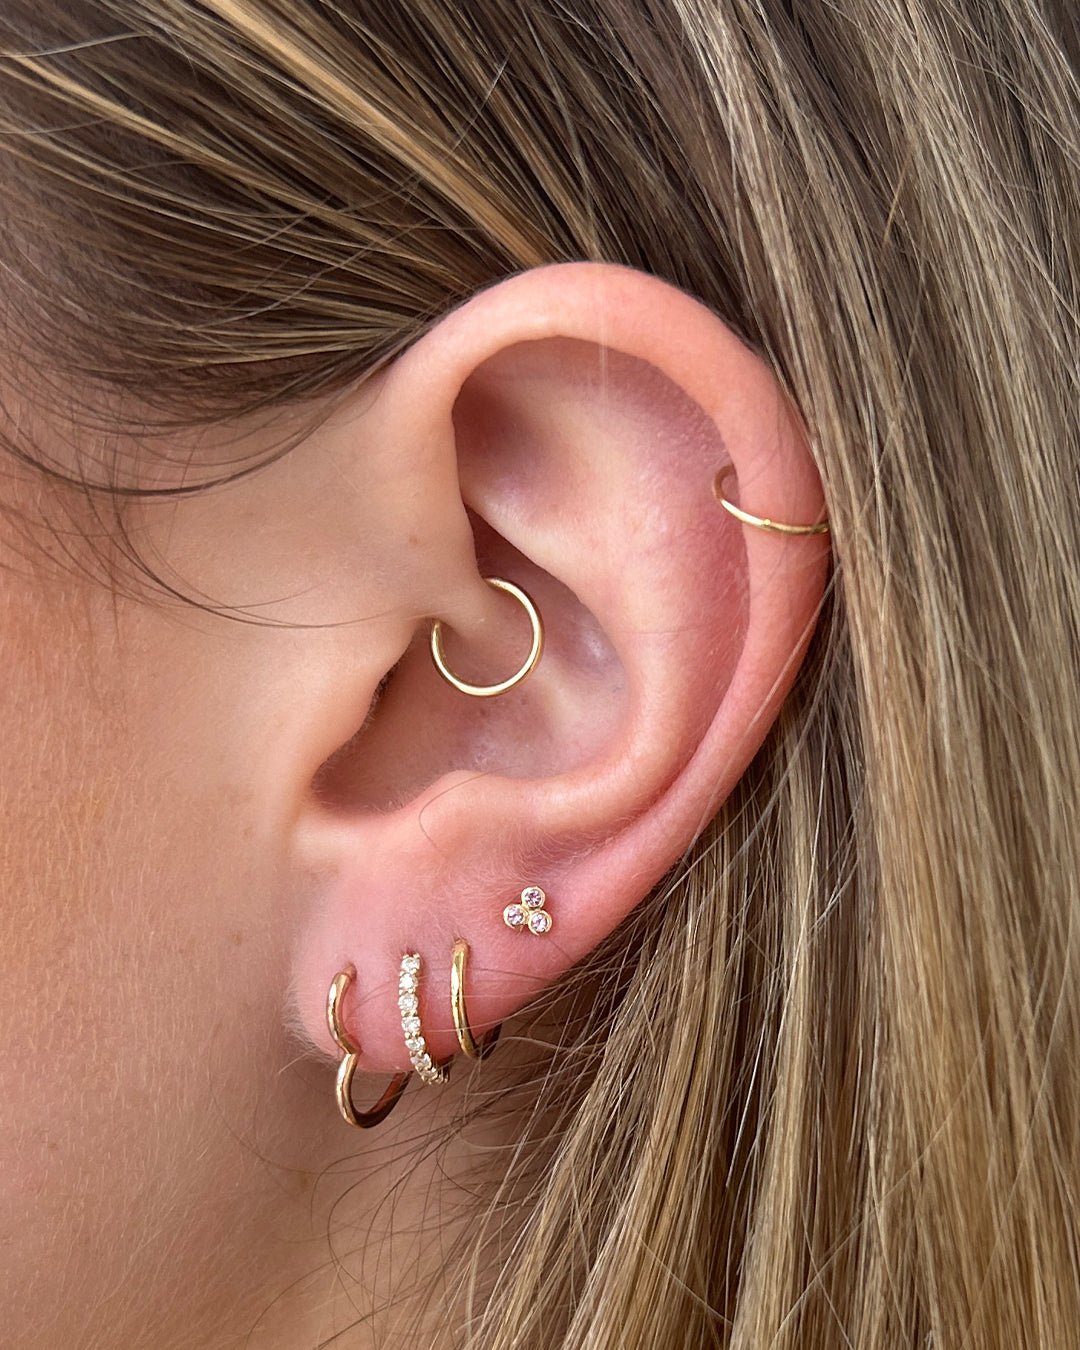 Woman wearing 14k gold and diamond earrings with a 14k rose gold heart huggie. 